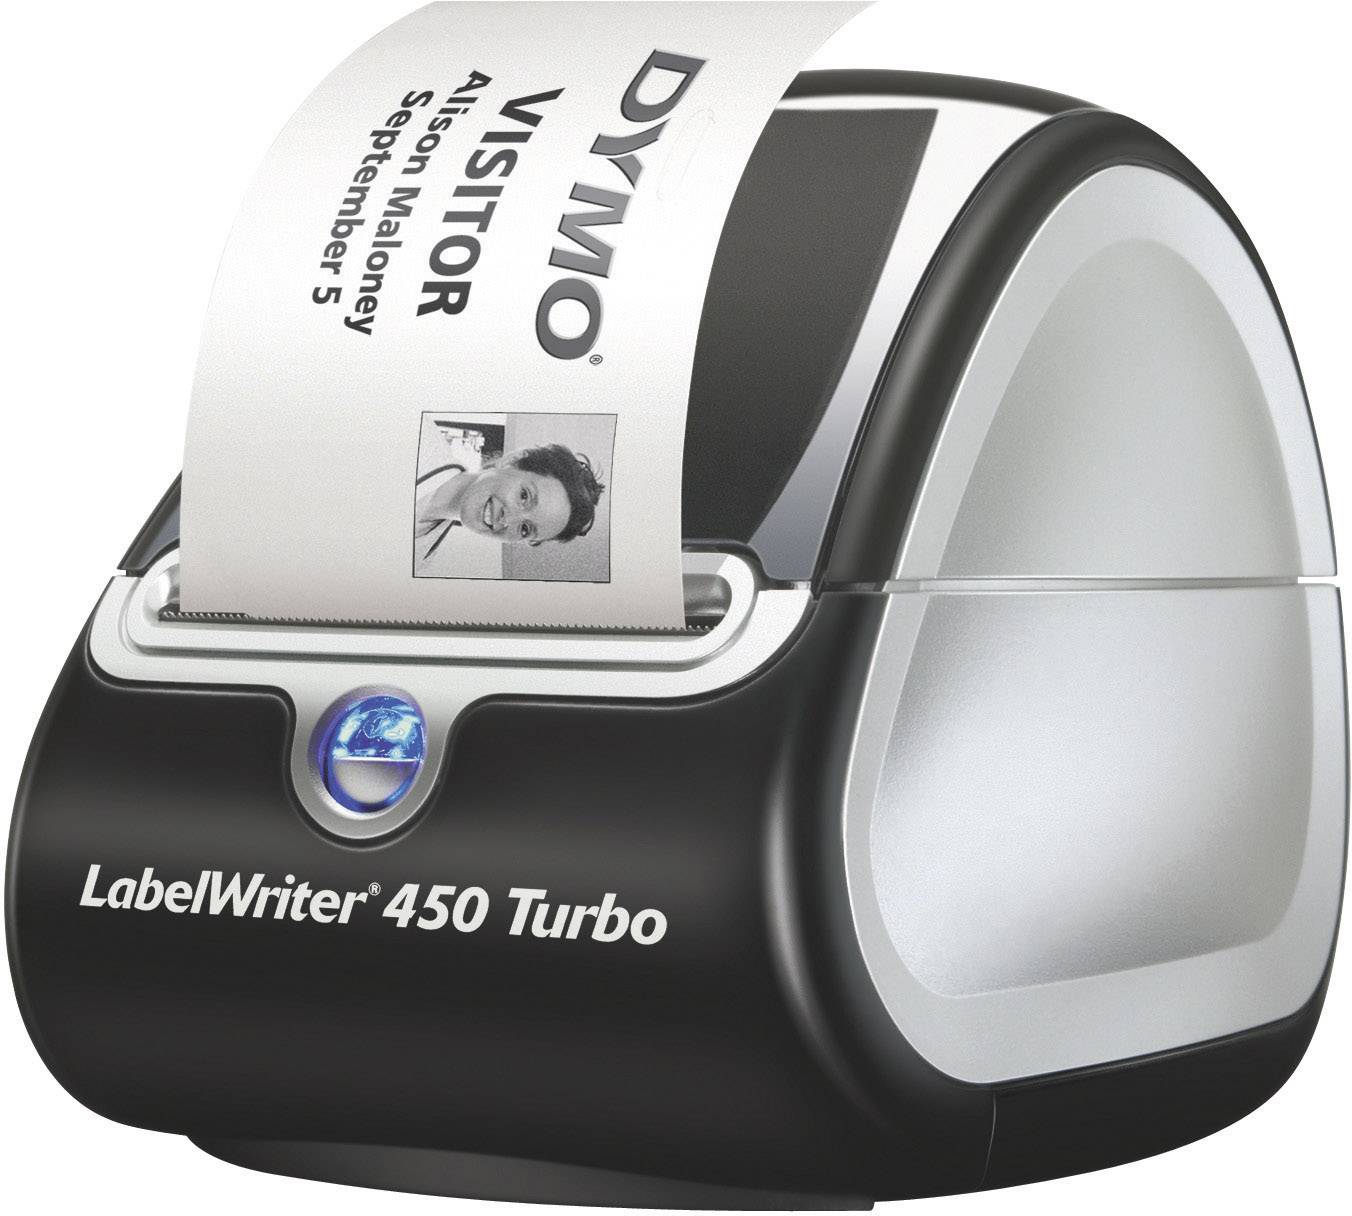 dymo-labelwriter 450 twin turbo software download